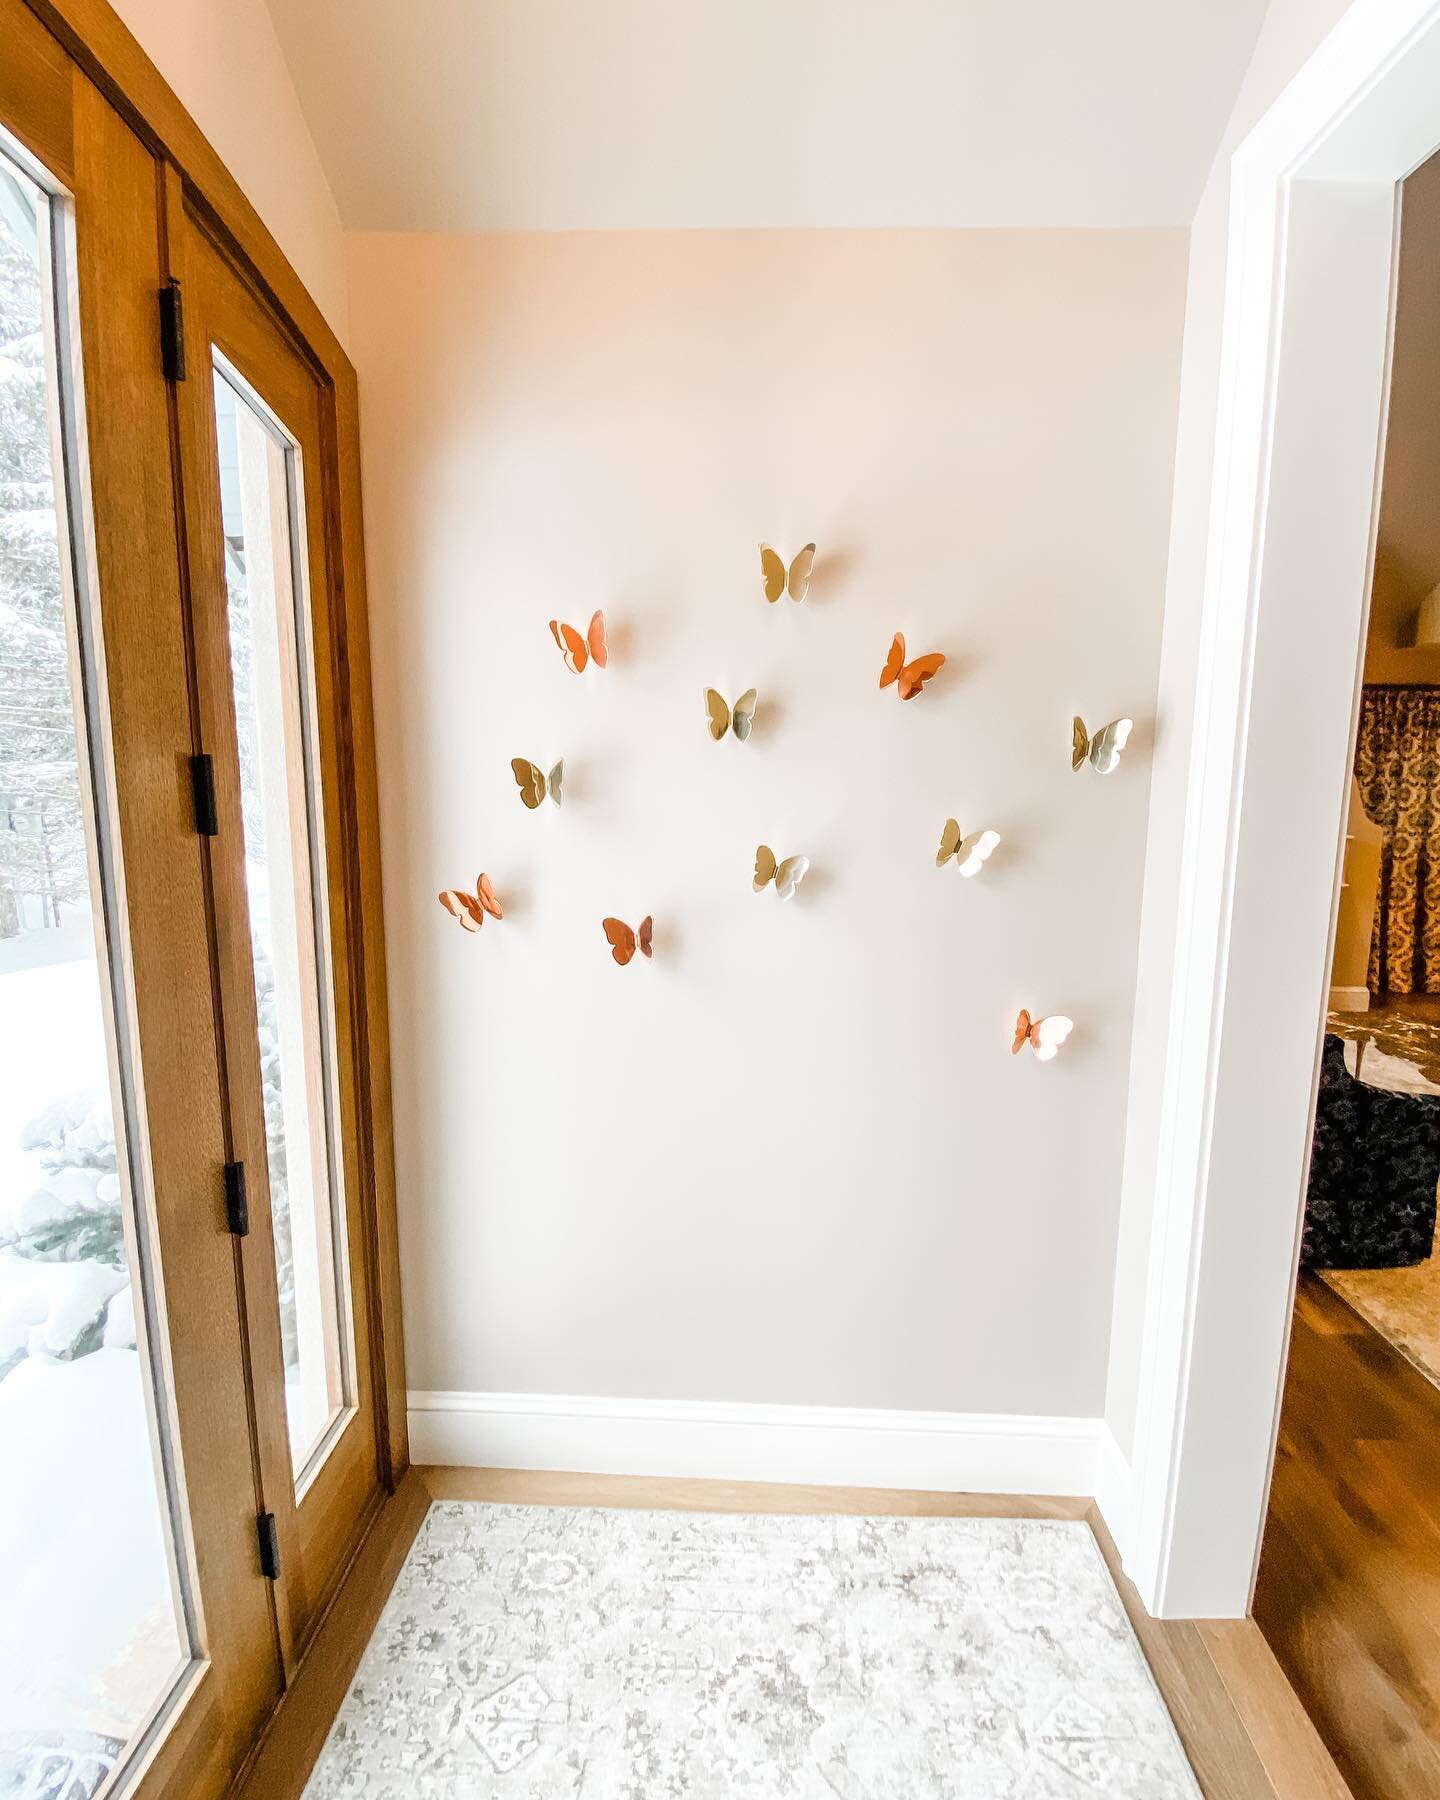 Loving the warmth of these butterfly coat hangers by @richardhuttenstudio on this snowy Friday!